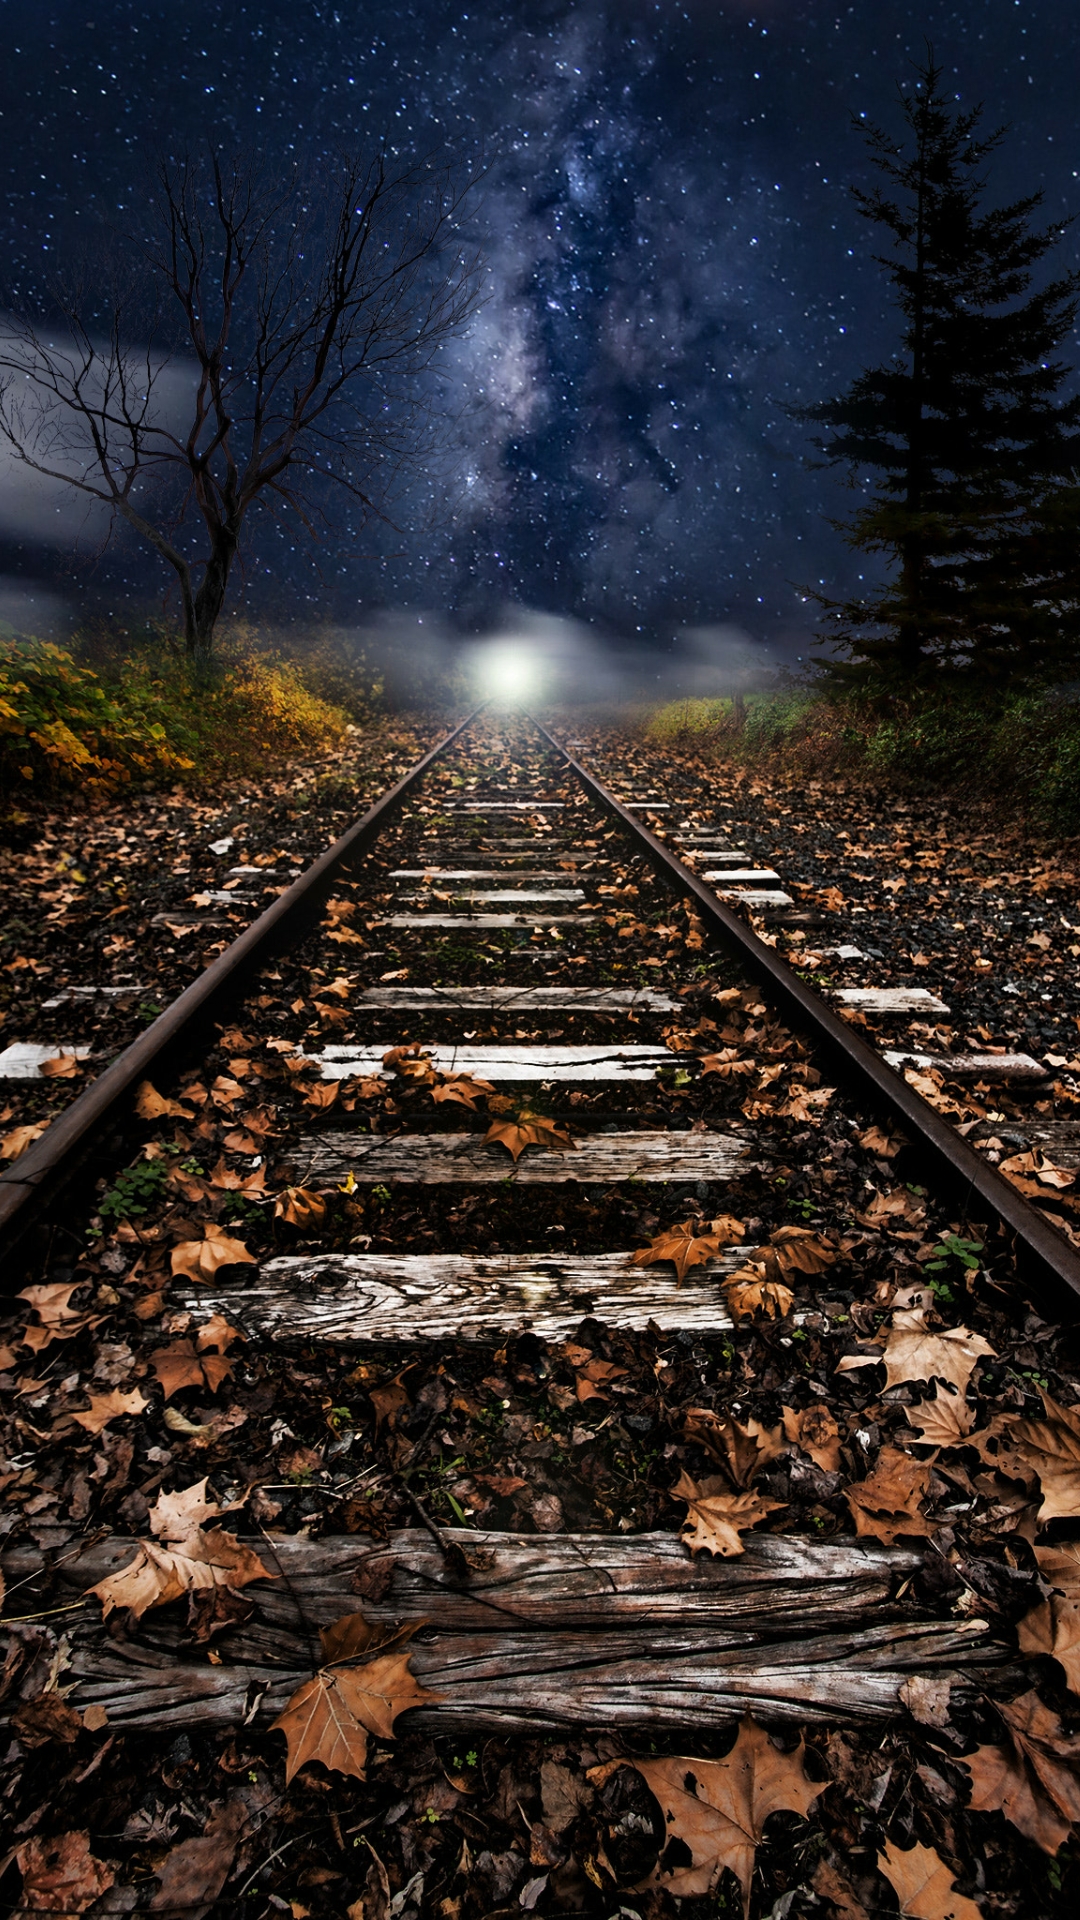 Xiaomi Redmi Note 4 Wallpaper with Artistic Picture of Old Railway - HD ...